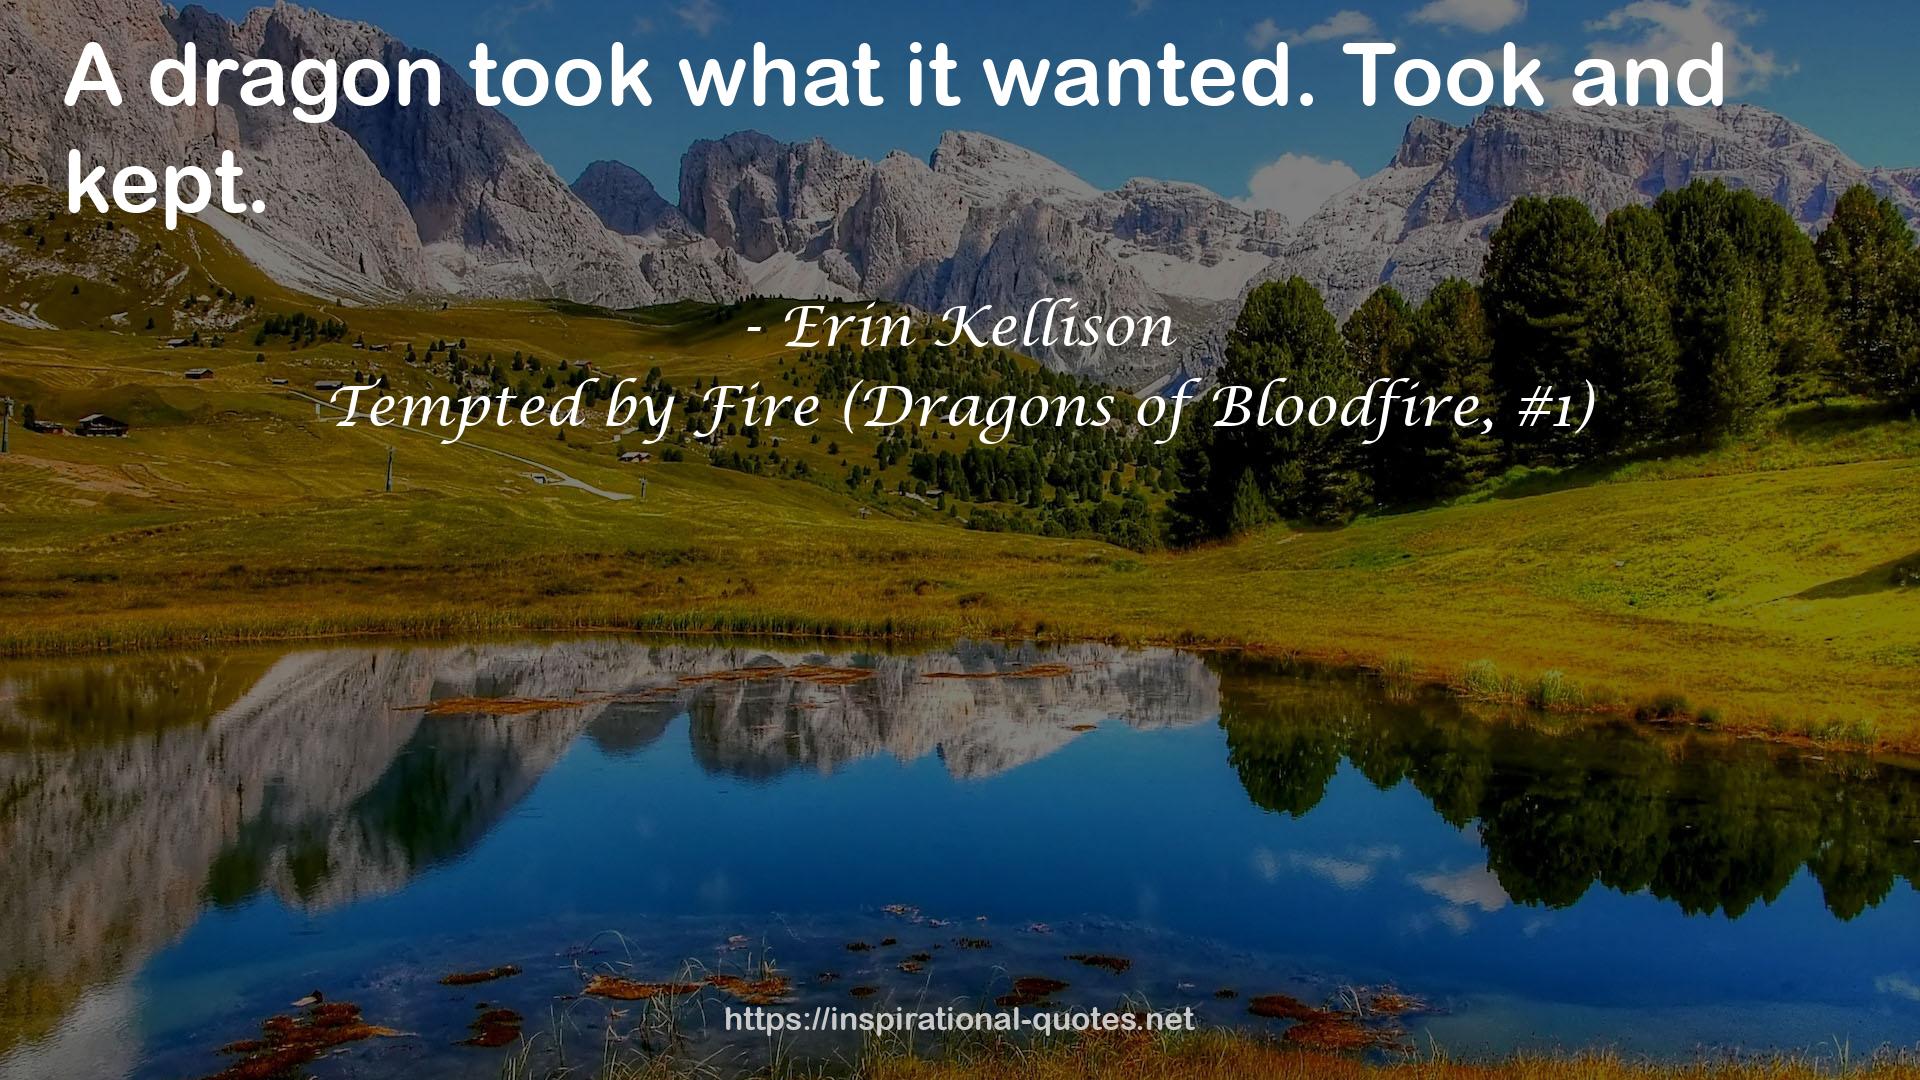 Tempted by Fire (Dragons of Bloodfire, #1) QUOTES